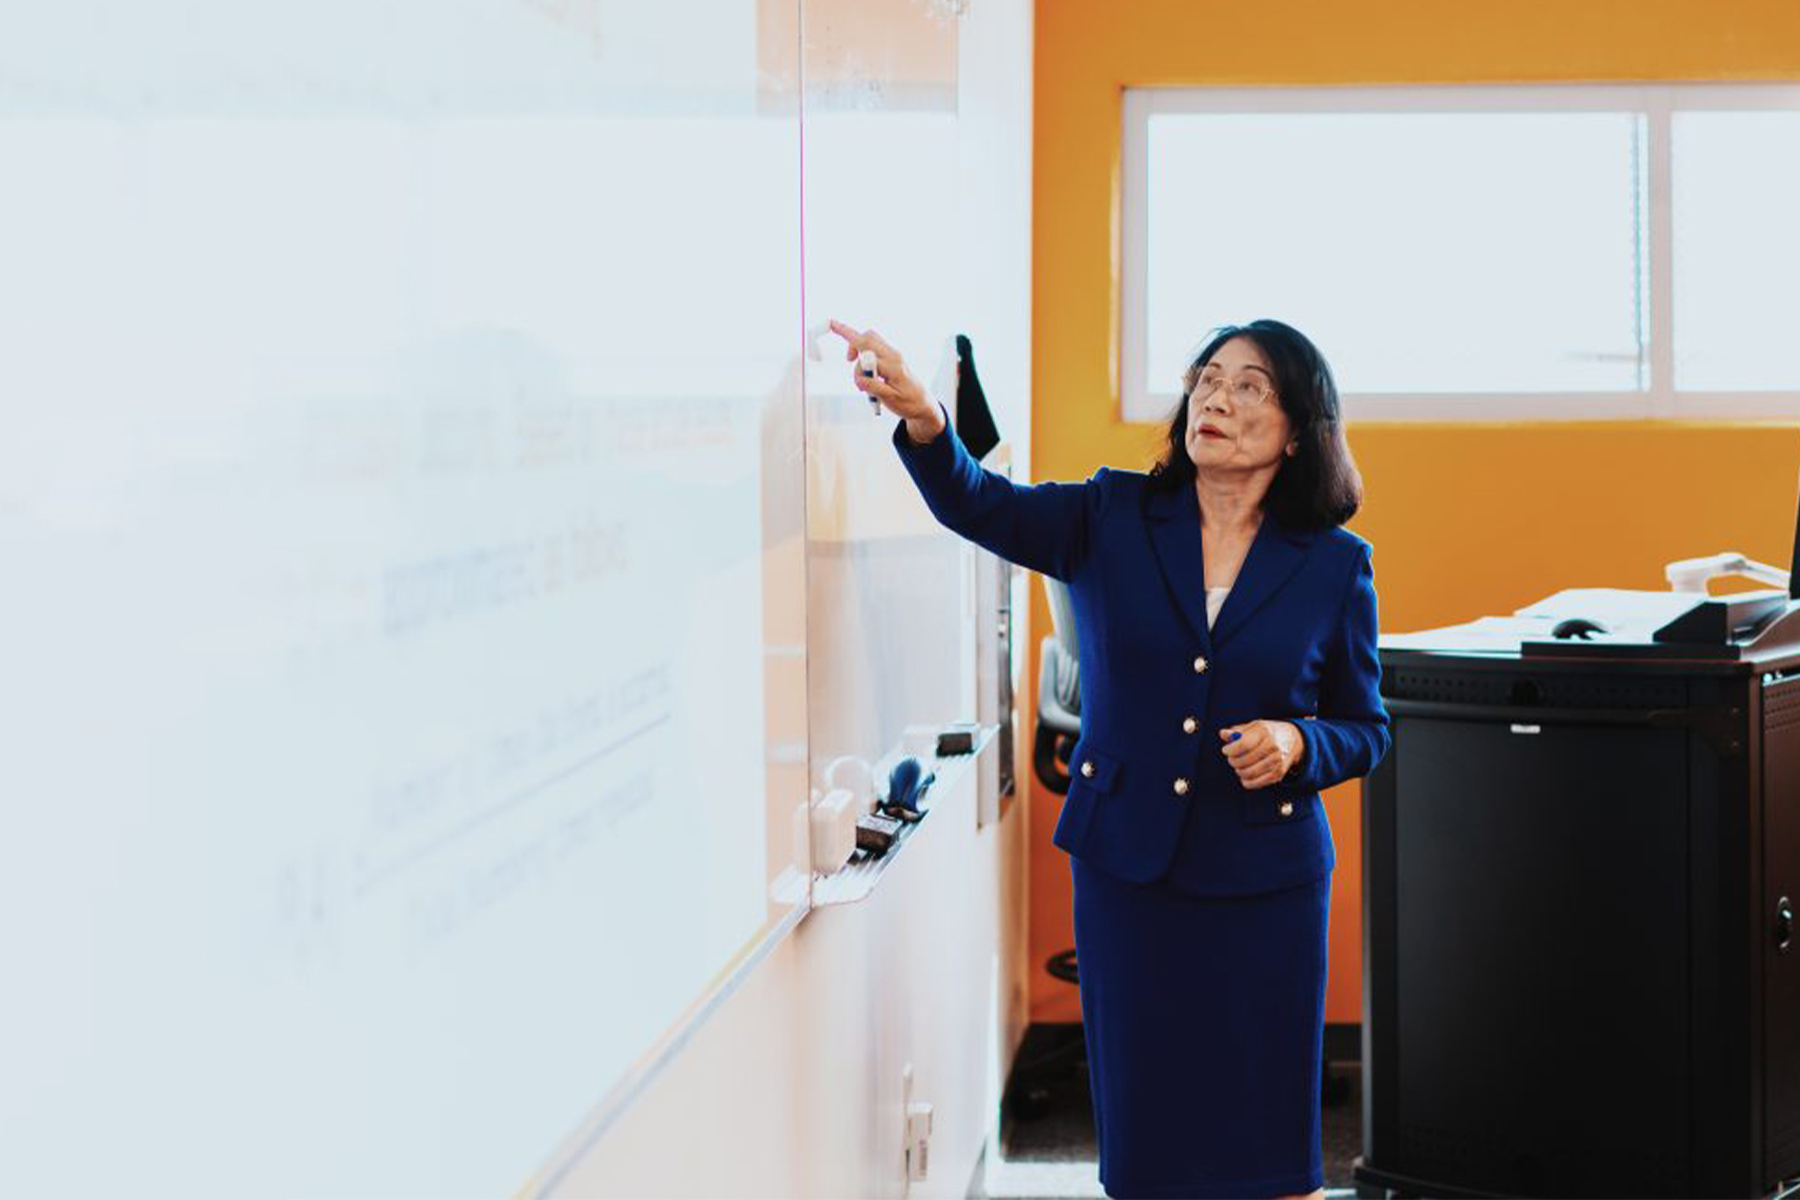 coastline professor Lisa Lee points at something on a white board as she instructs a class